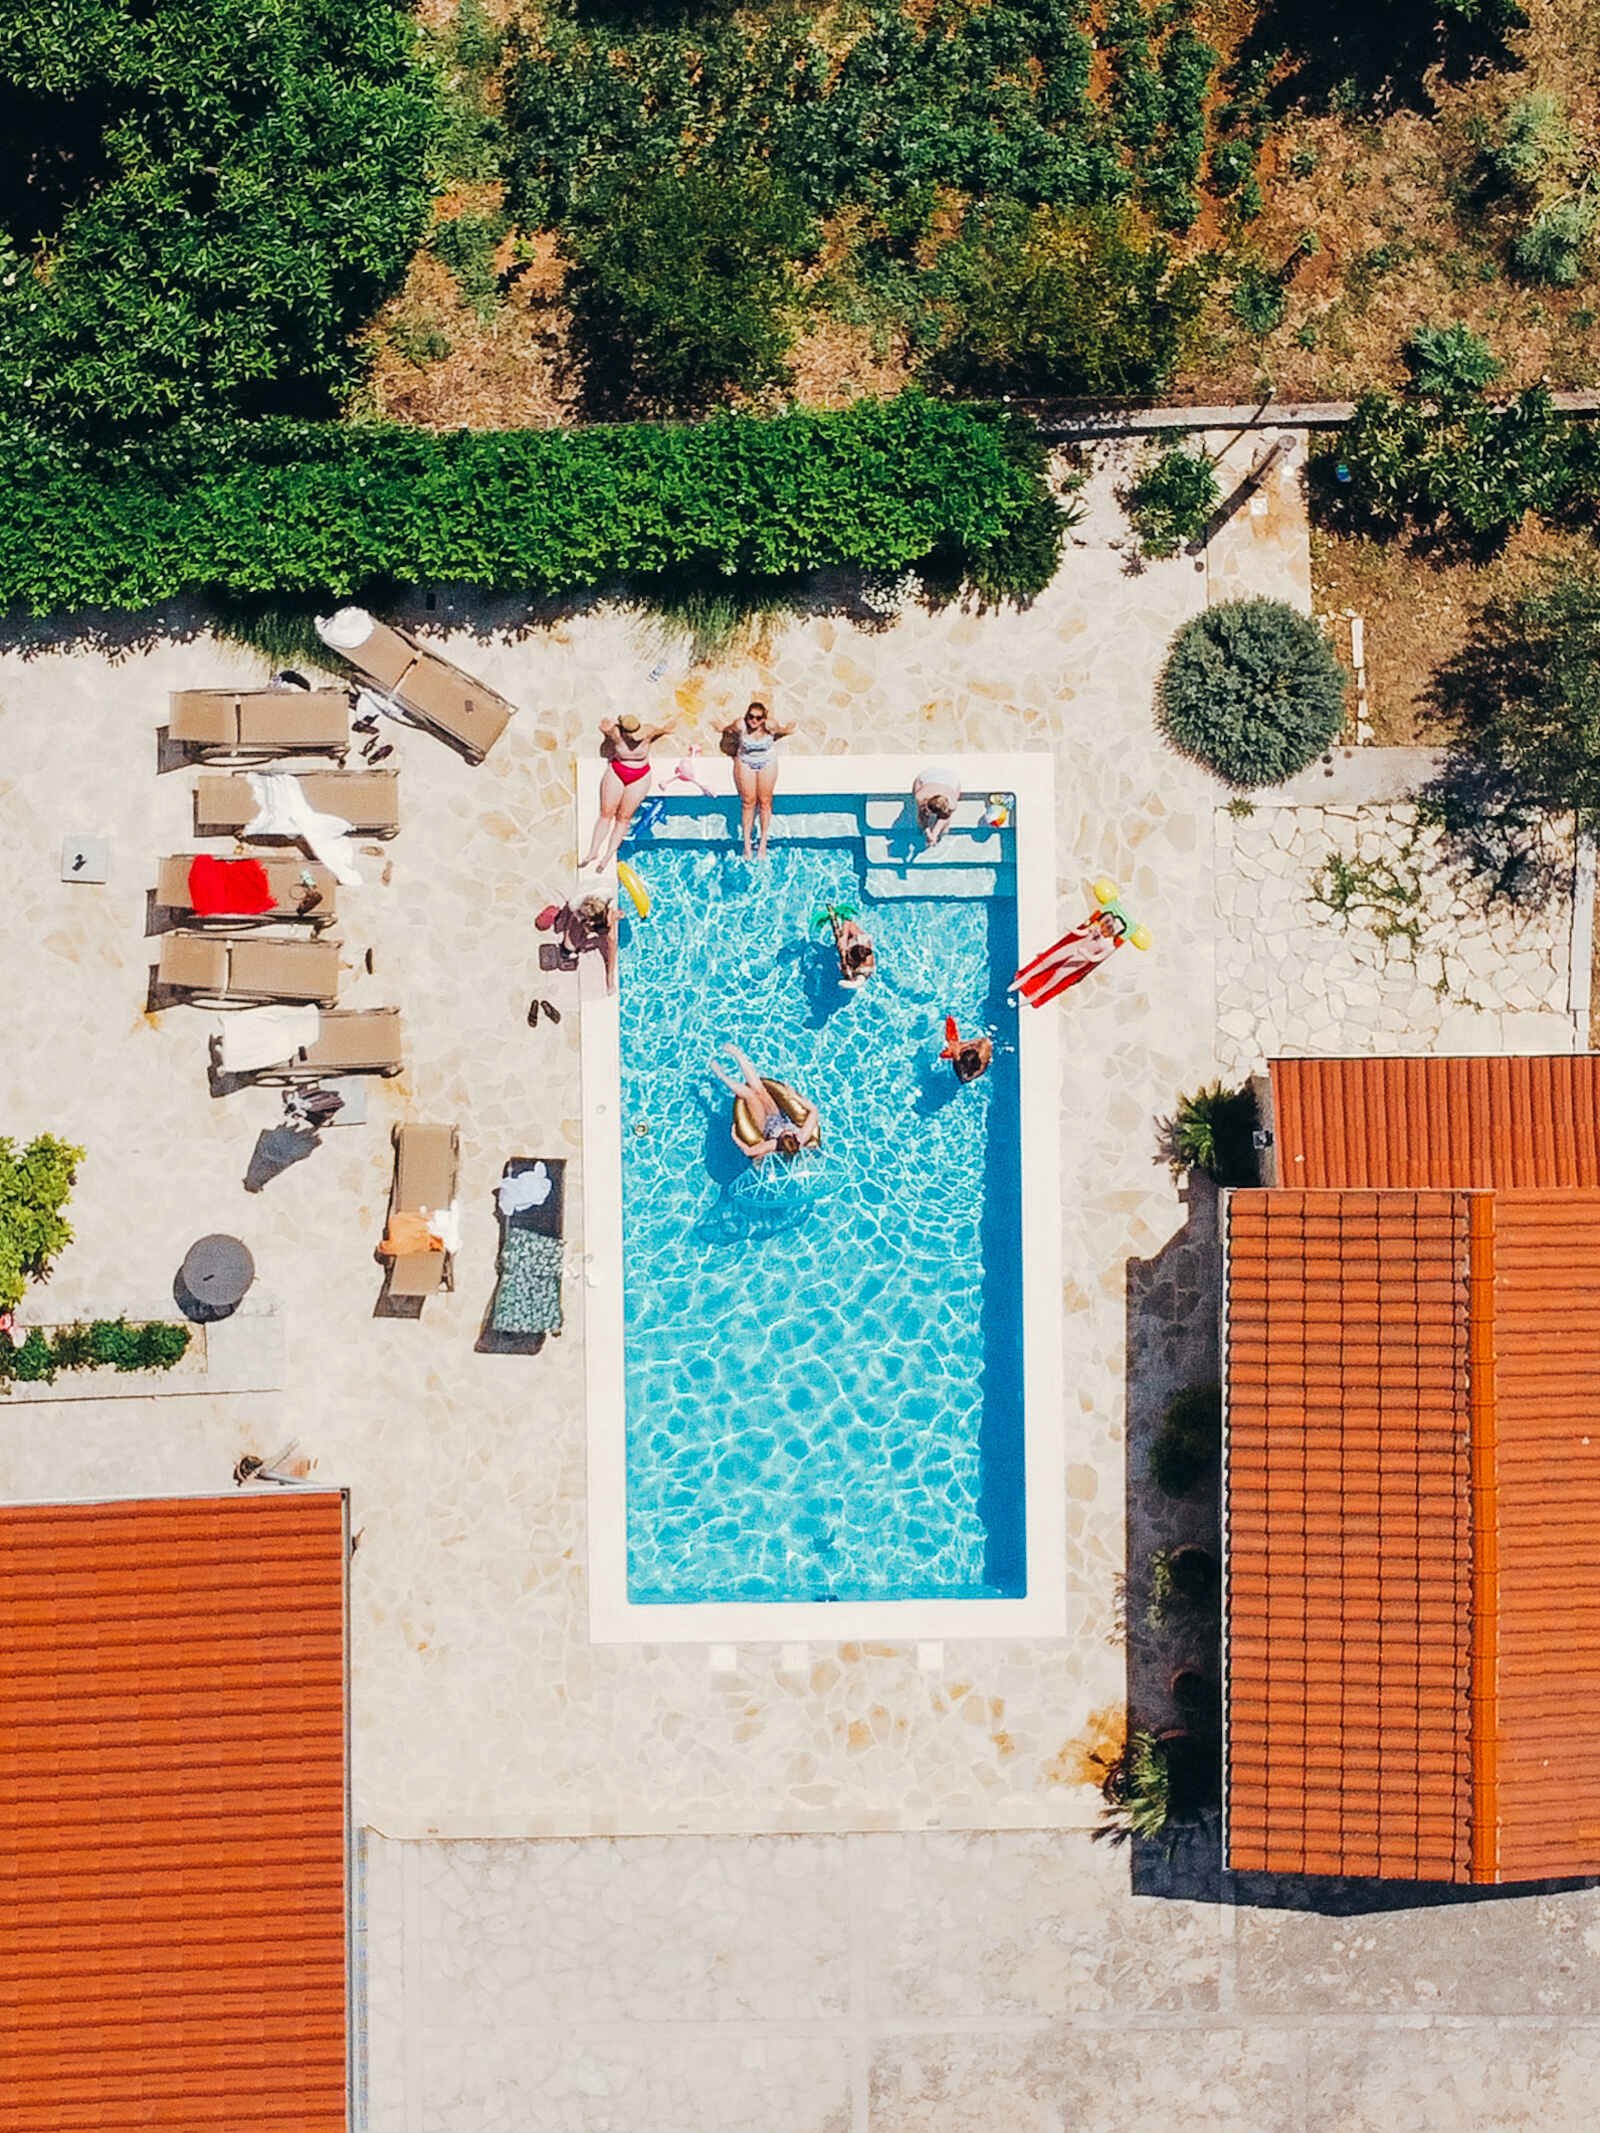 A drone shot looking down on a group of girls floating in and sitting aorund a rectangular pool